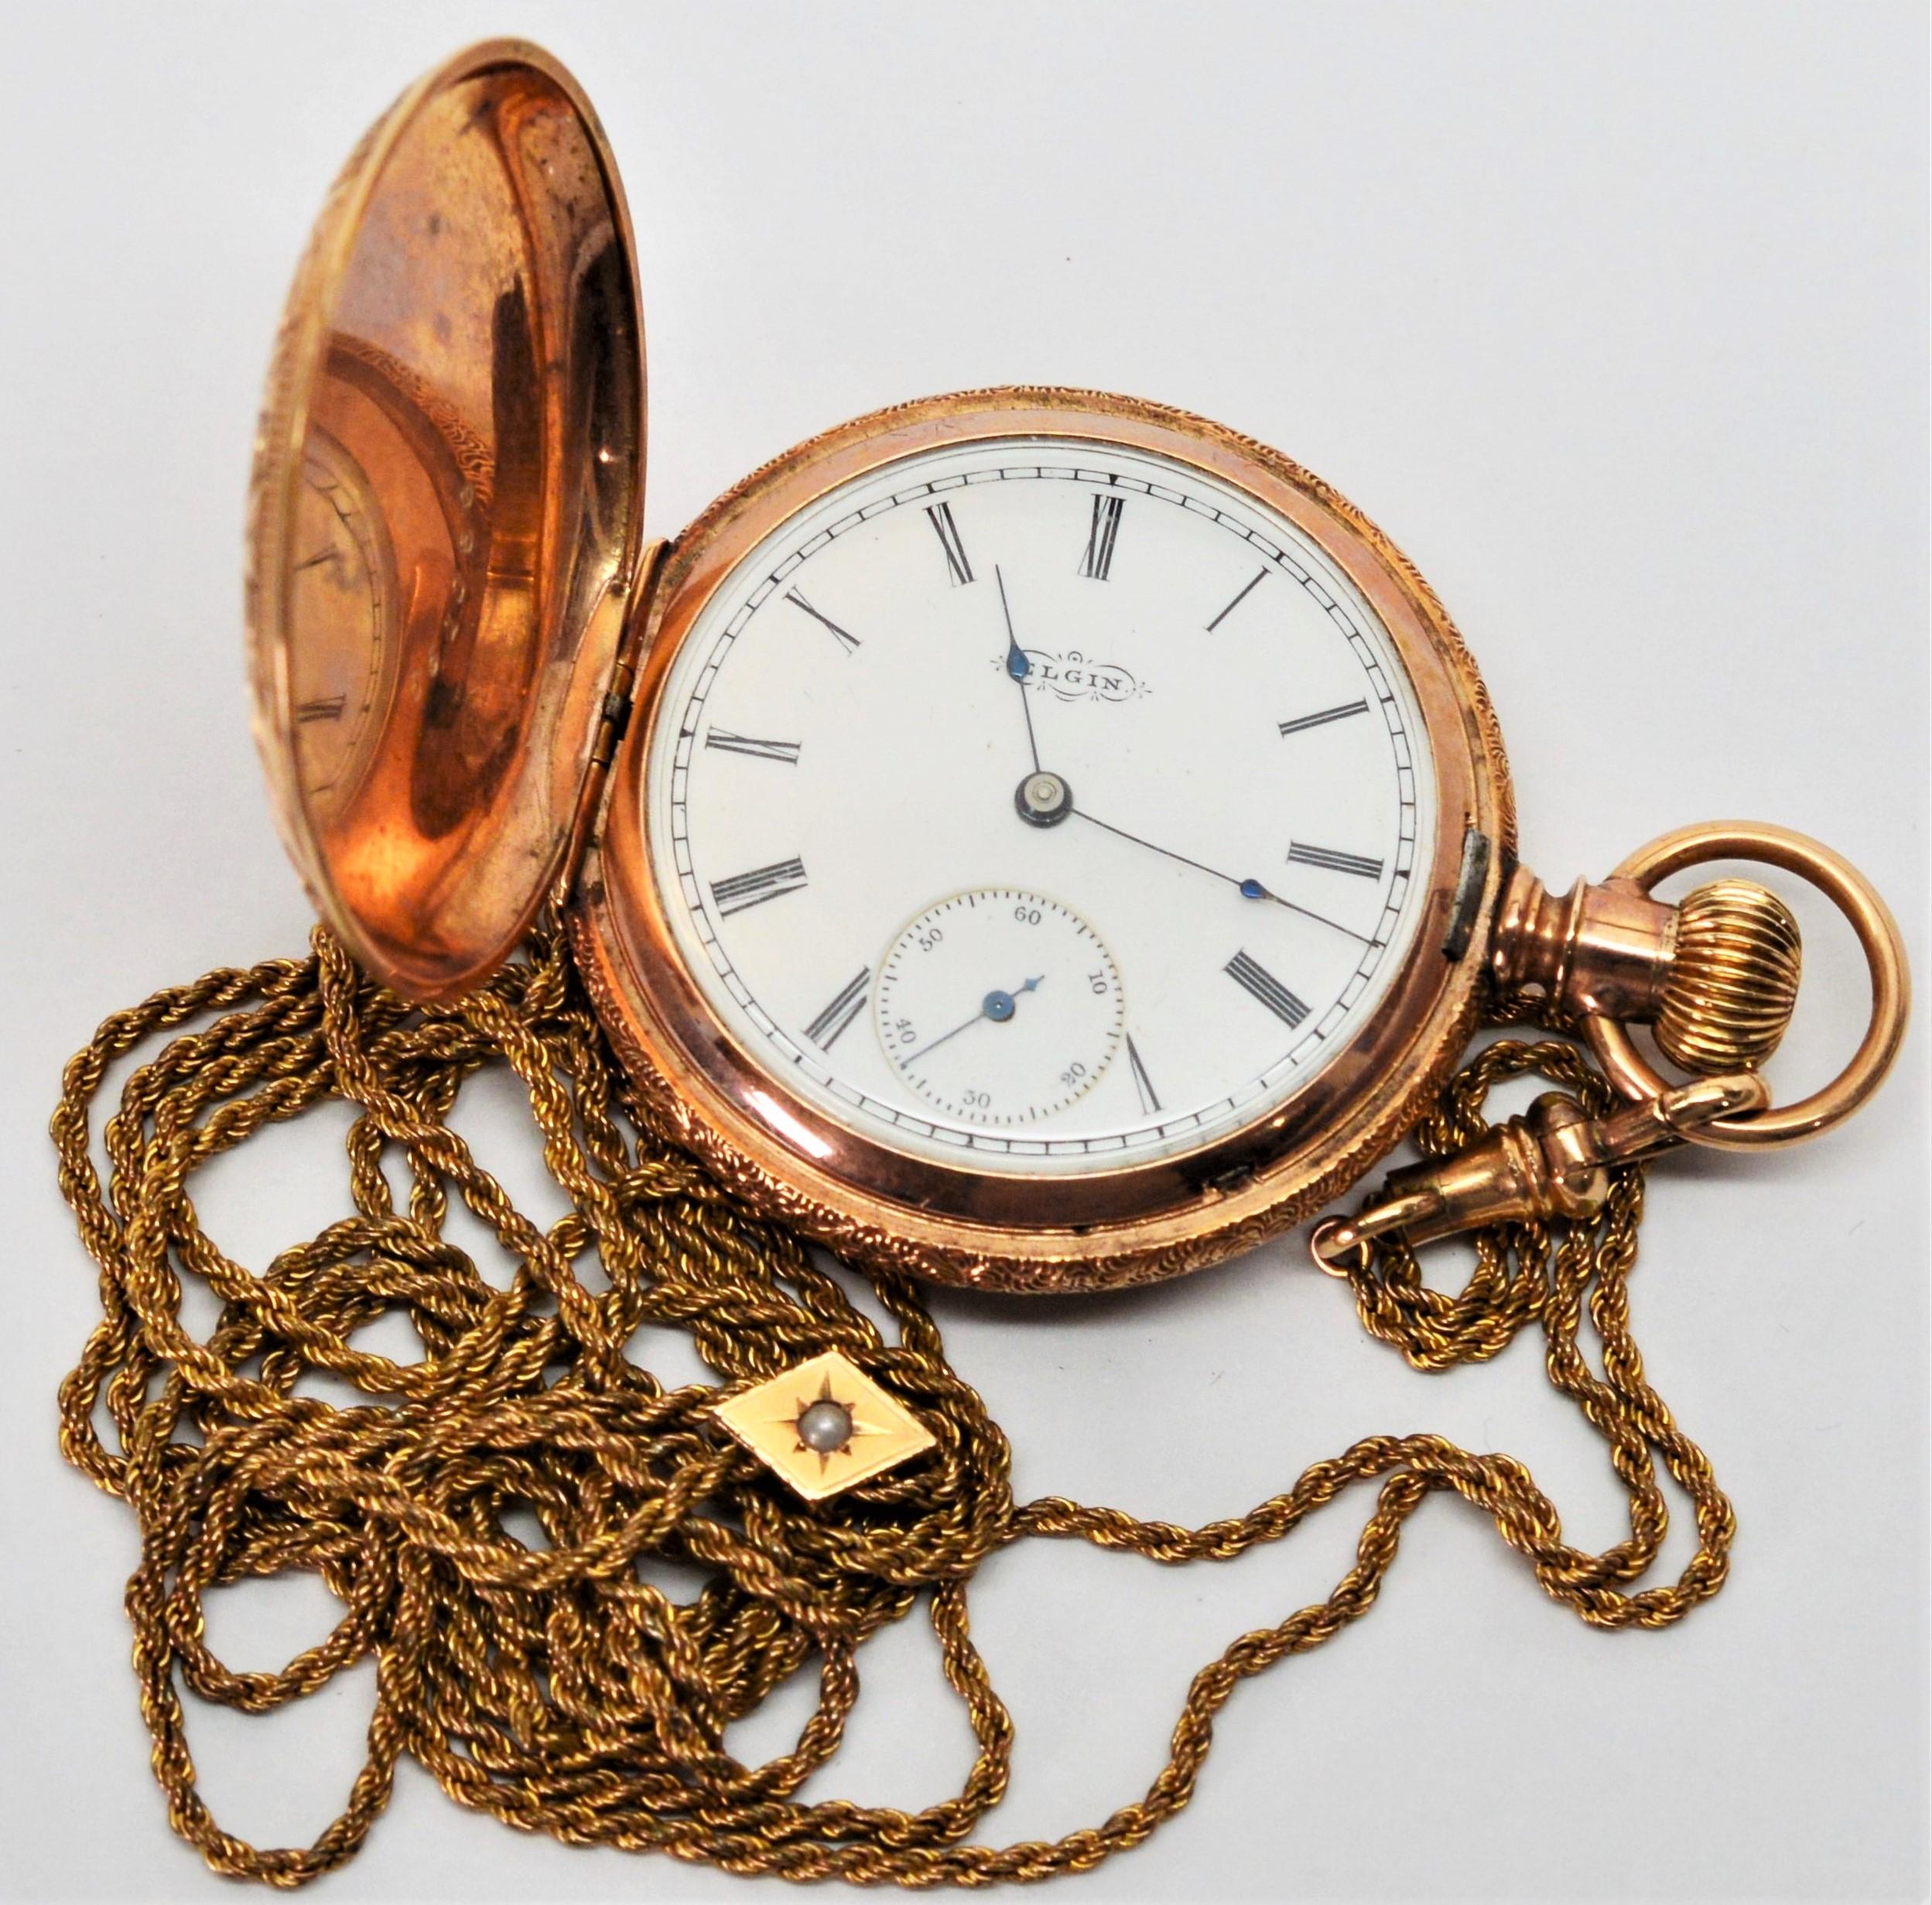 Circa 1891, Elgin National Watch Co. Ladies Pocket Watch. Size 18, 44.54mm in fourteen karat 14K rose gold plate. Accompanied by with long 48 inch gold filled 1.25 mm rope chain with decorative slide with a pearl accent. White face with Roman